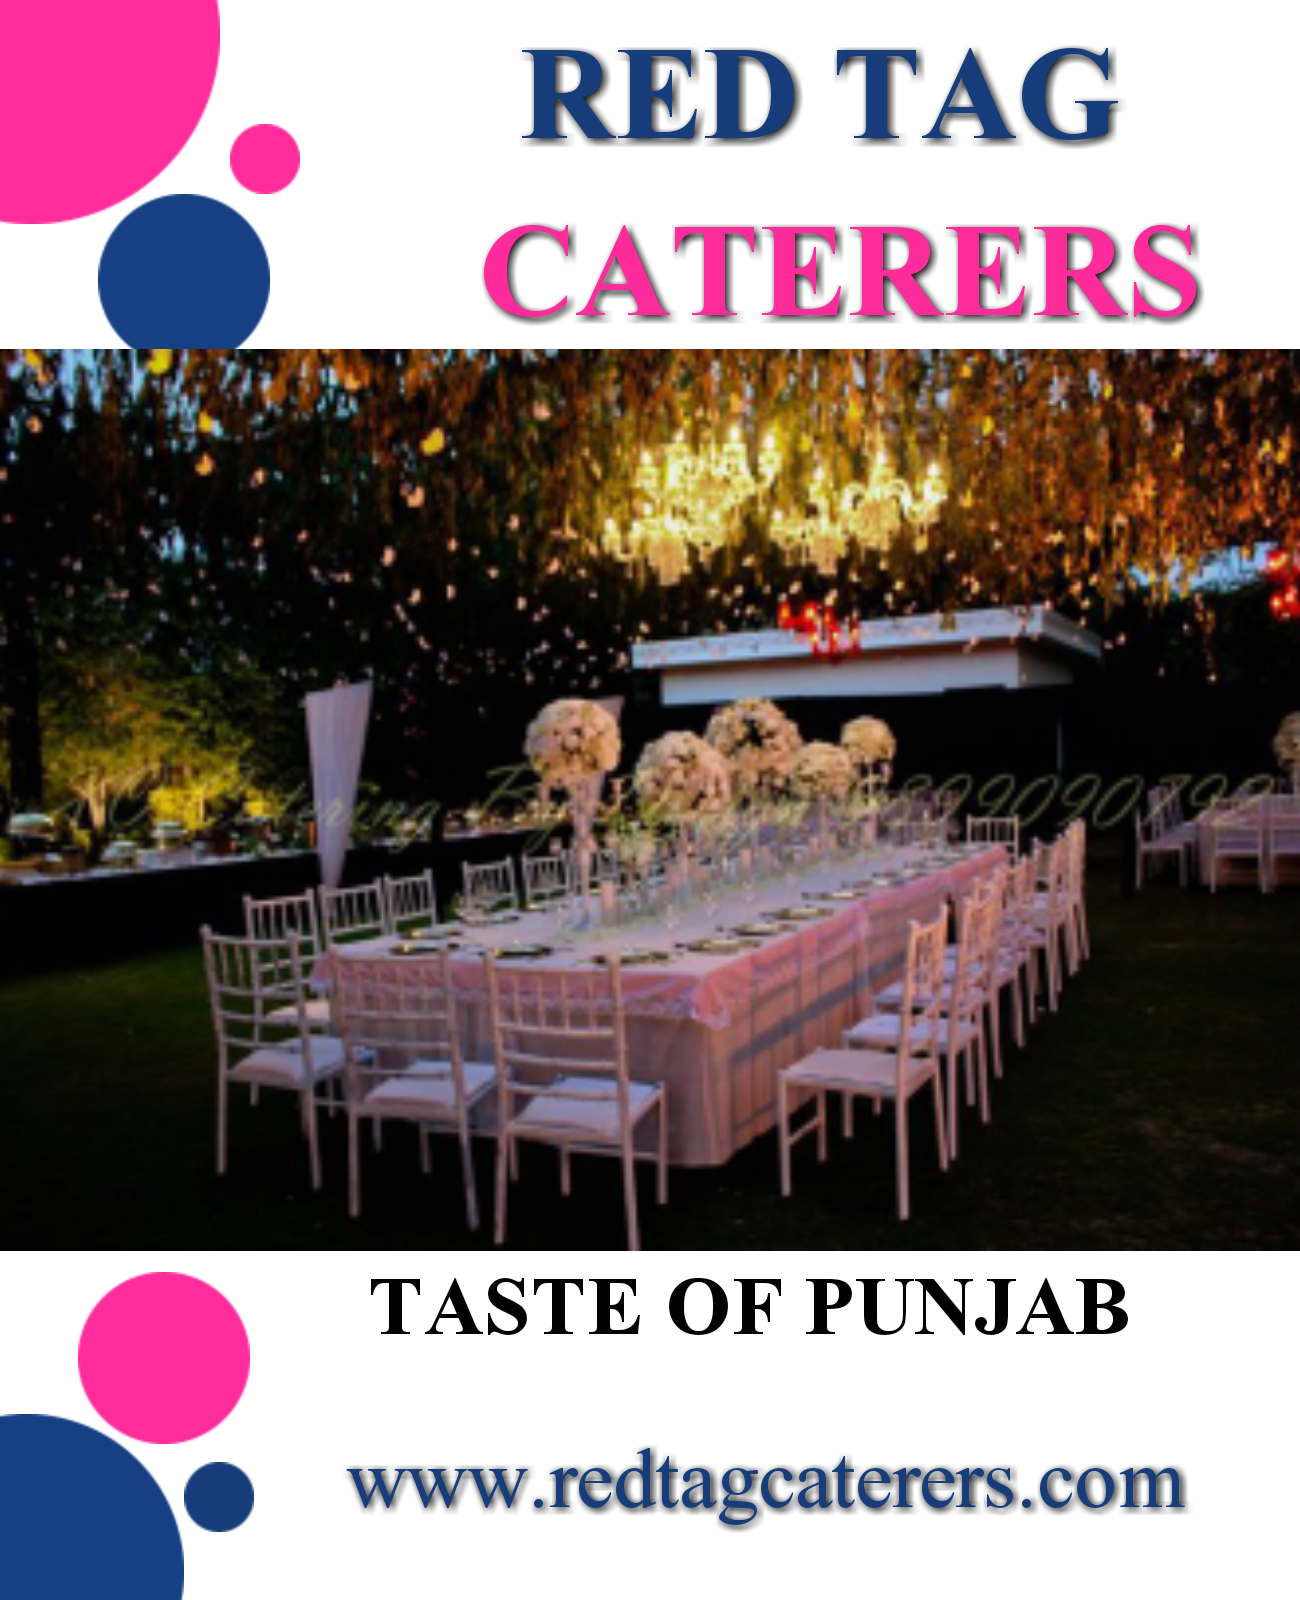 Best caterers in Ludhiana with hygienic food  | Red Tag Caterers | Best caterers in Ludhiana with hygienic food, best caterers in Ludhiana, best catering service in Ludhiana, best wedding caterers in Ludhiana, best non-vegetarian catering in Ludhiana,  - GL44310